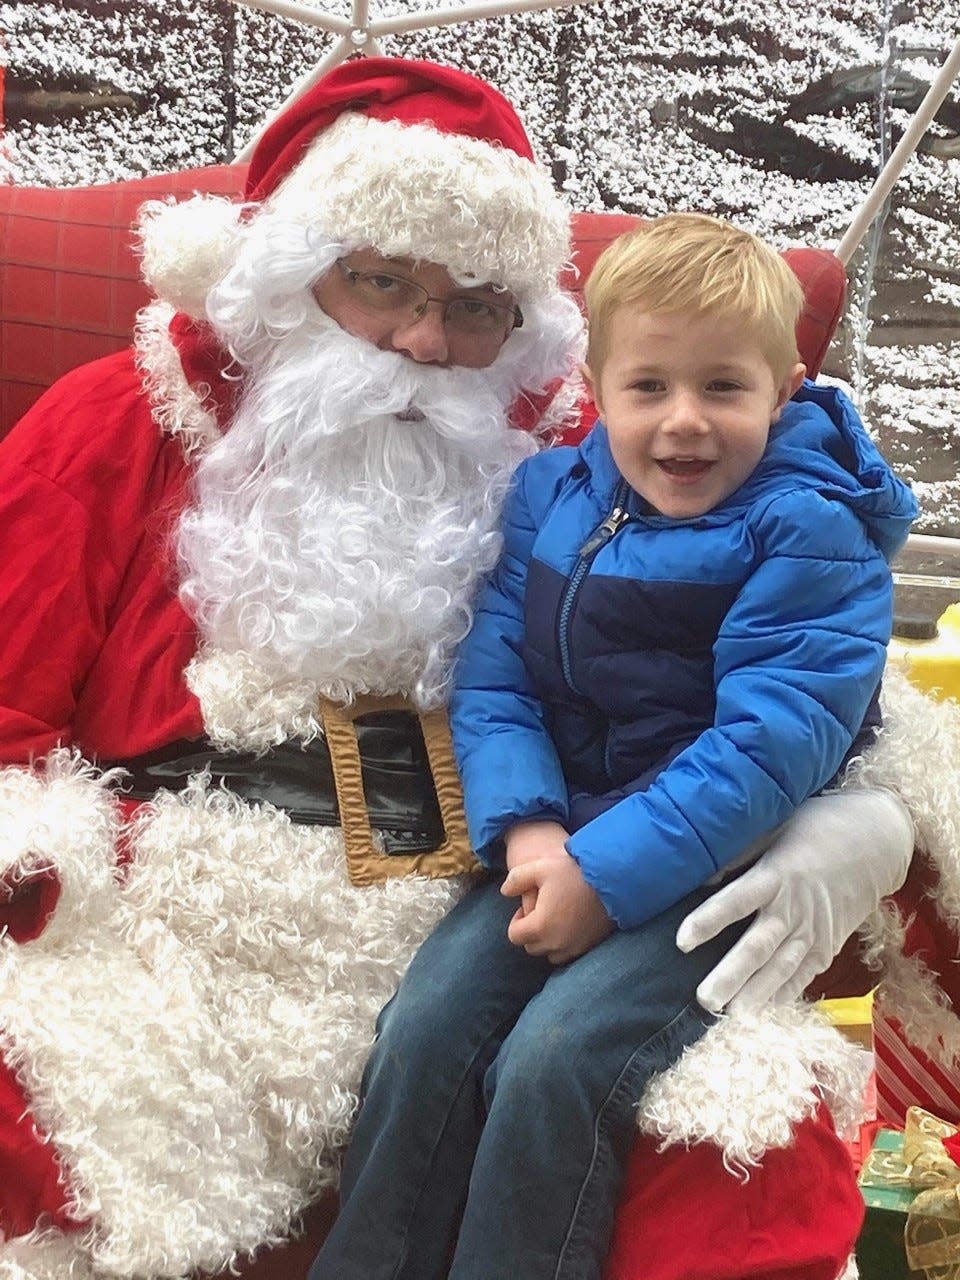 Santa in an igloo, which debuted in 2021, will return to downtown Monroe this year. Santa's first apperance is during Small Business Saturday.
(Photo: PROVIDED BY DOWNTOWN MONROE BUSINESS NETWORK)